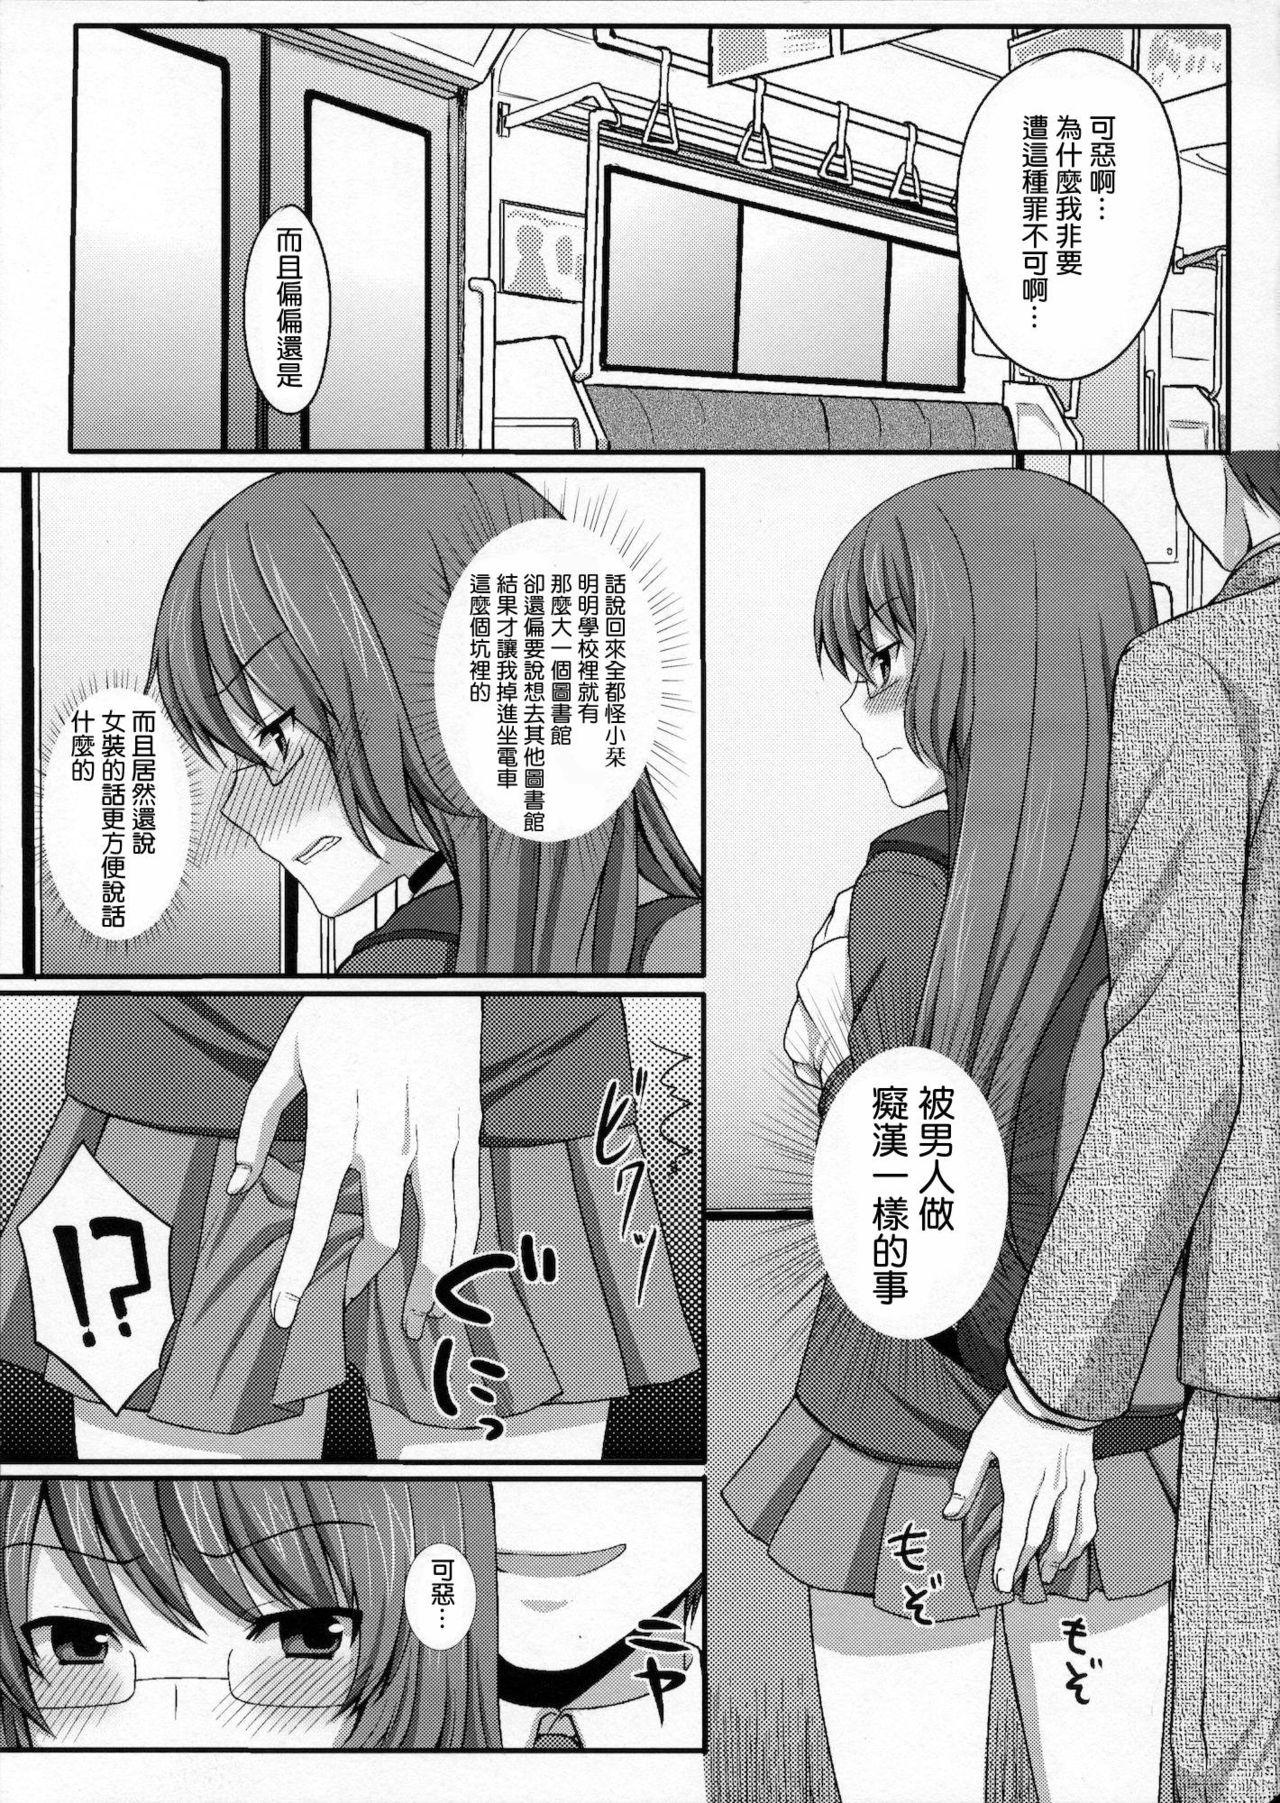 Face Fuck Kami-sama o Chikan - The world god only knows Culo Grande - Page 2